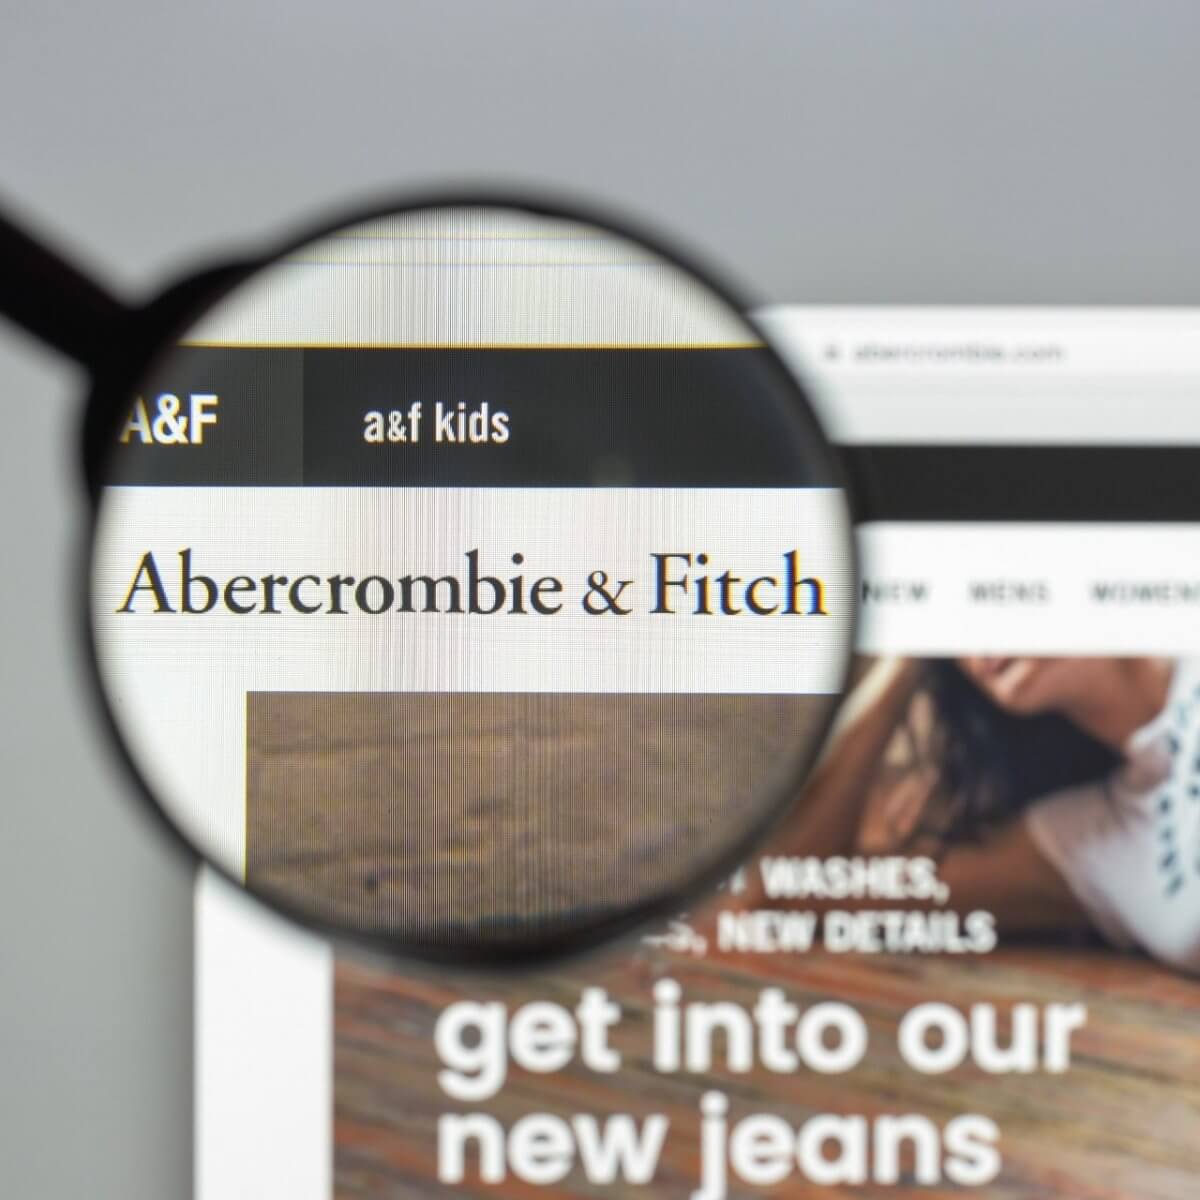 abercrombie and fitch usa website access